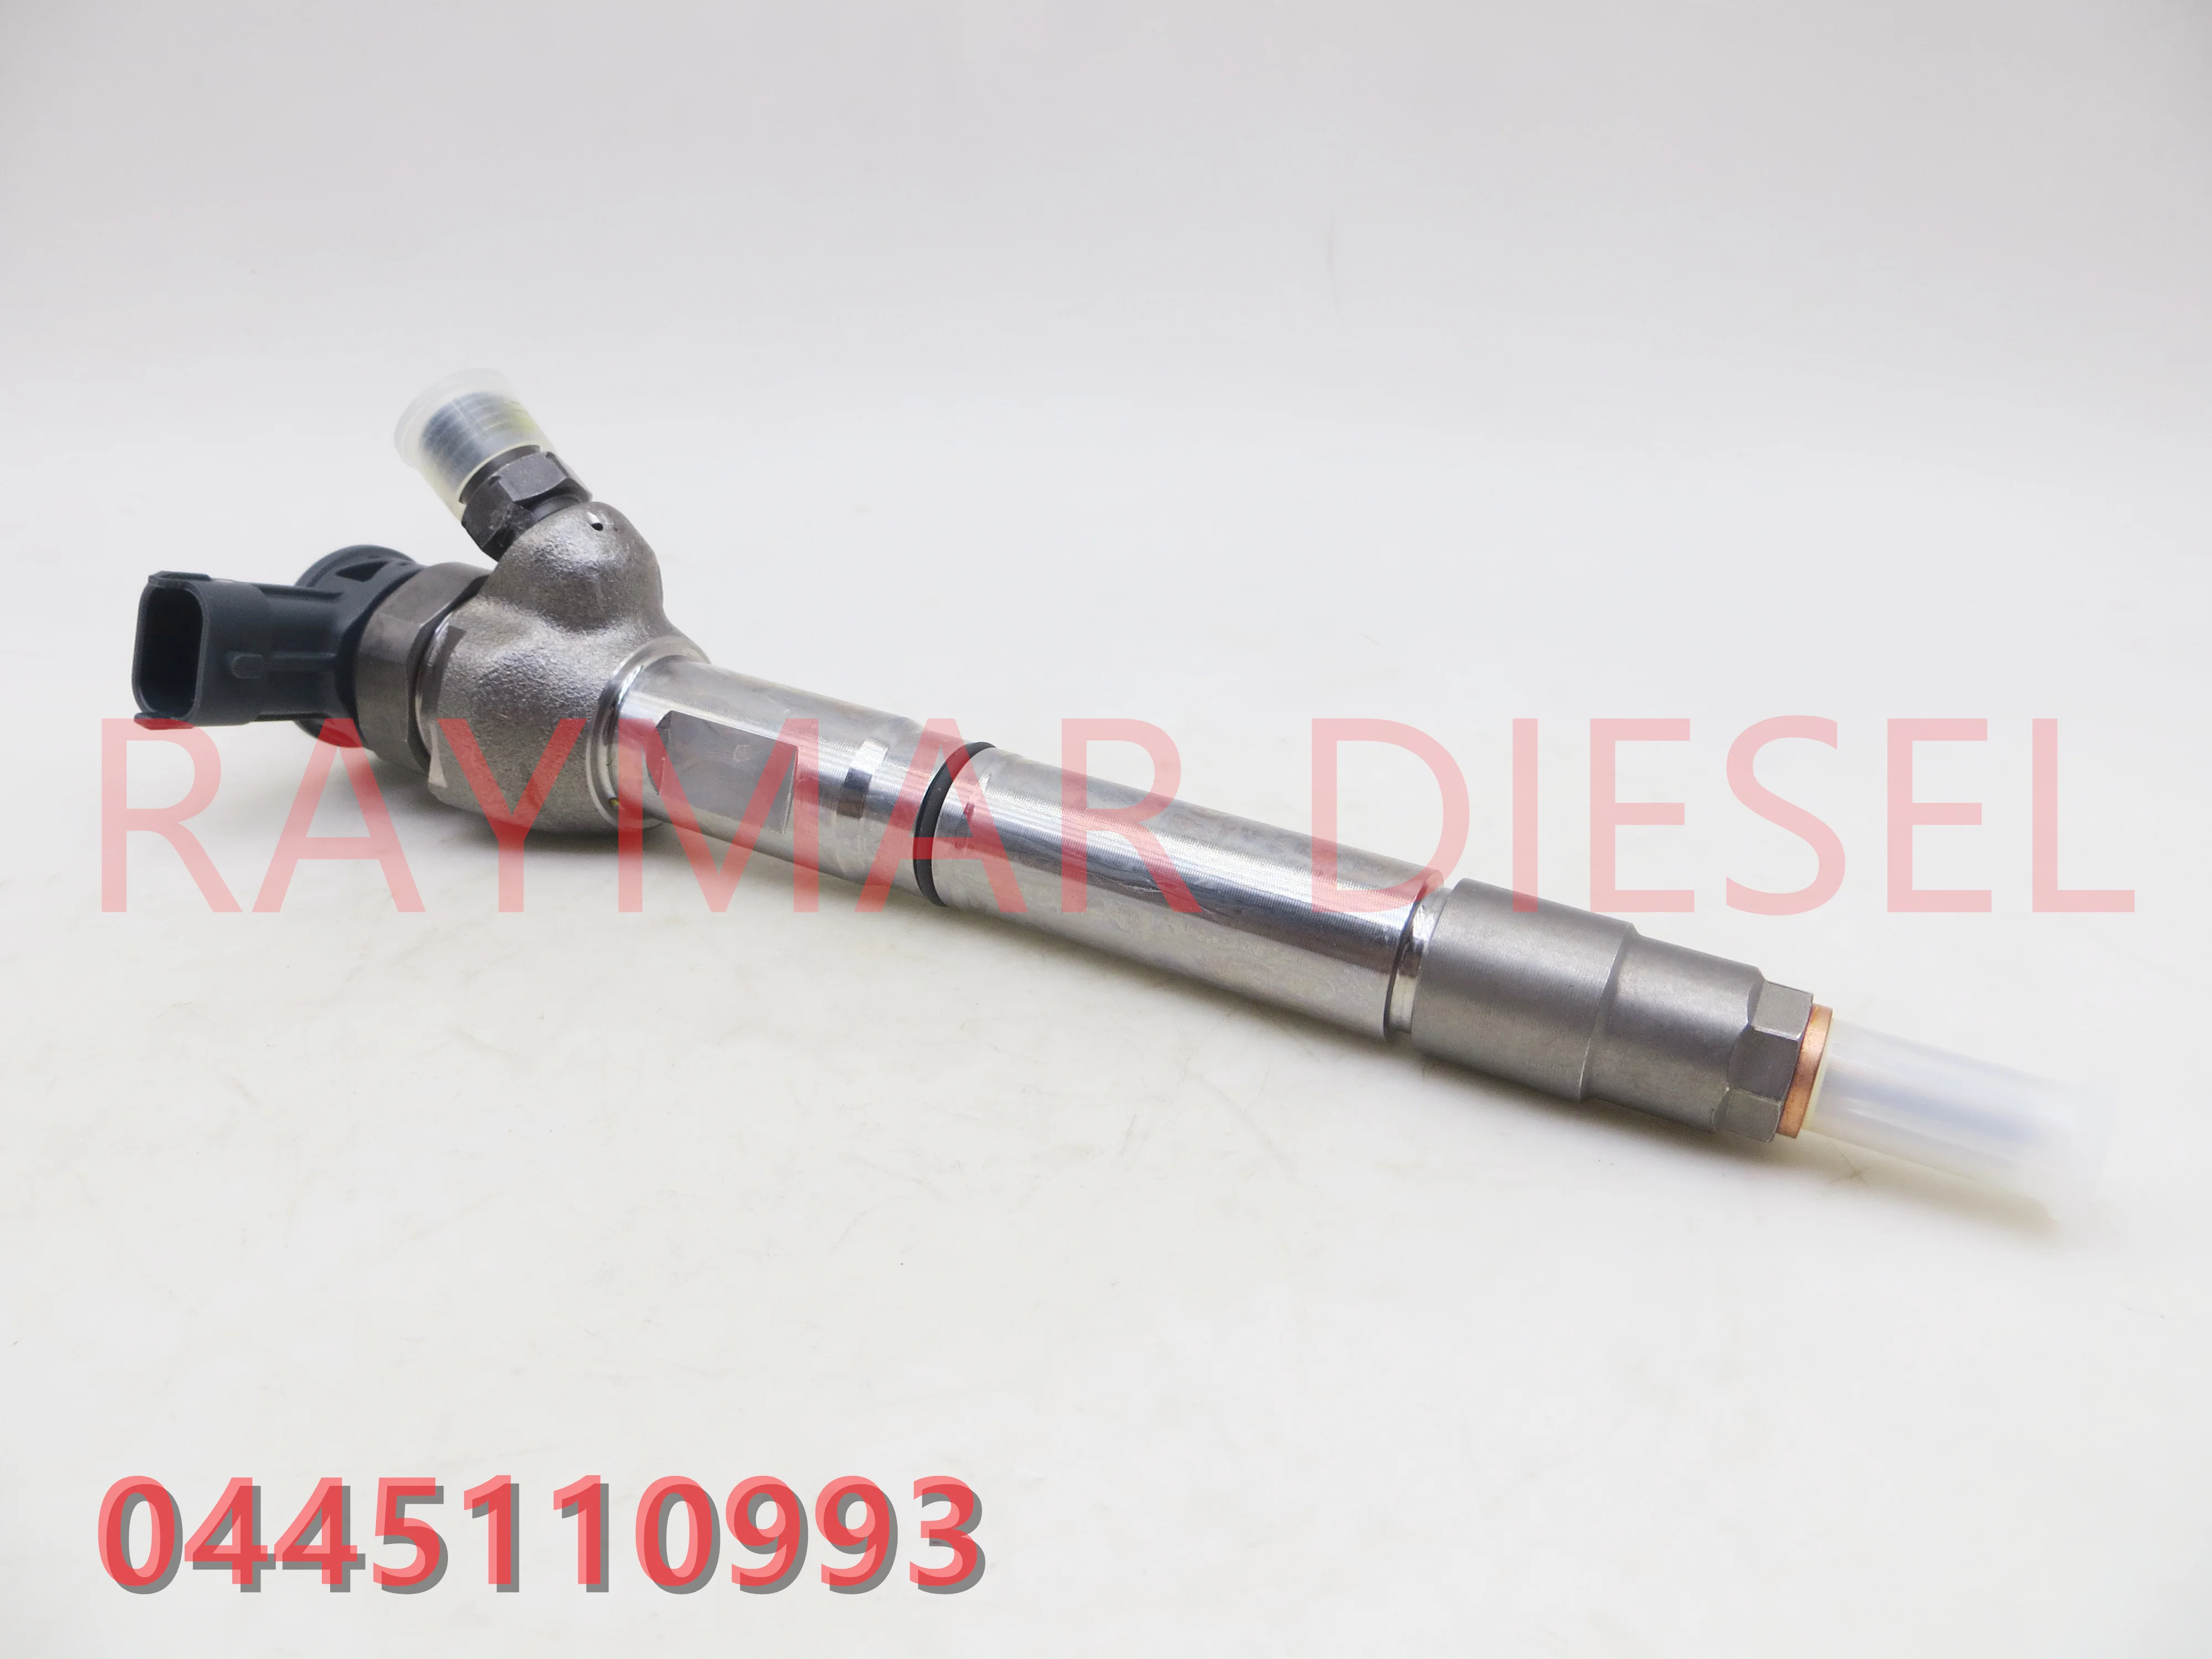 

Genuine New Diesel Common Rail Fuel Injector 0445110993, 0445110994, 33800-4A200